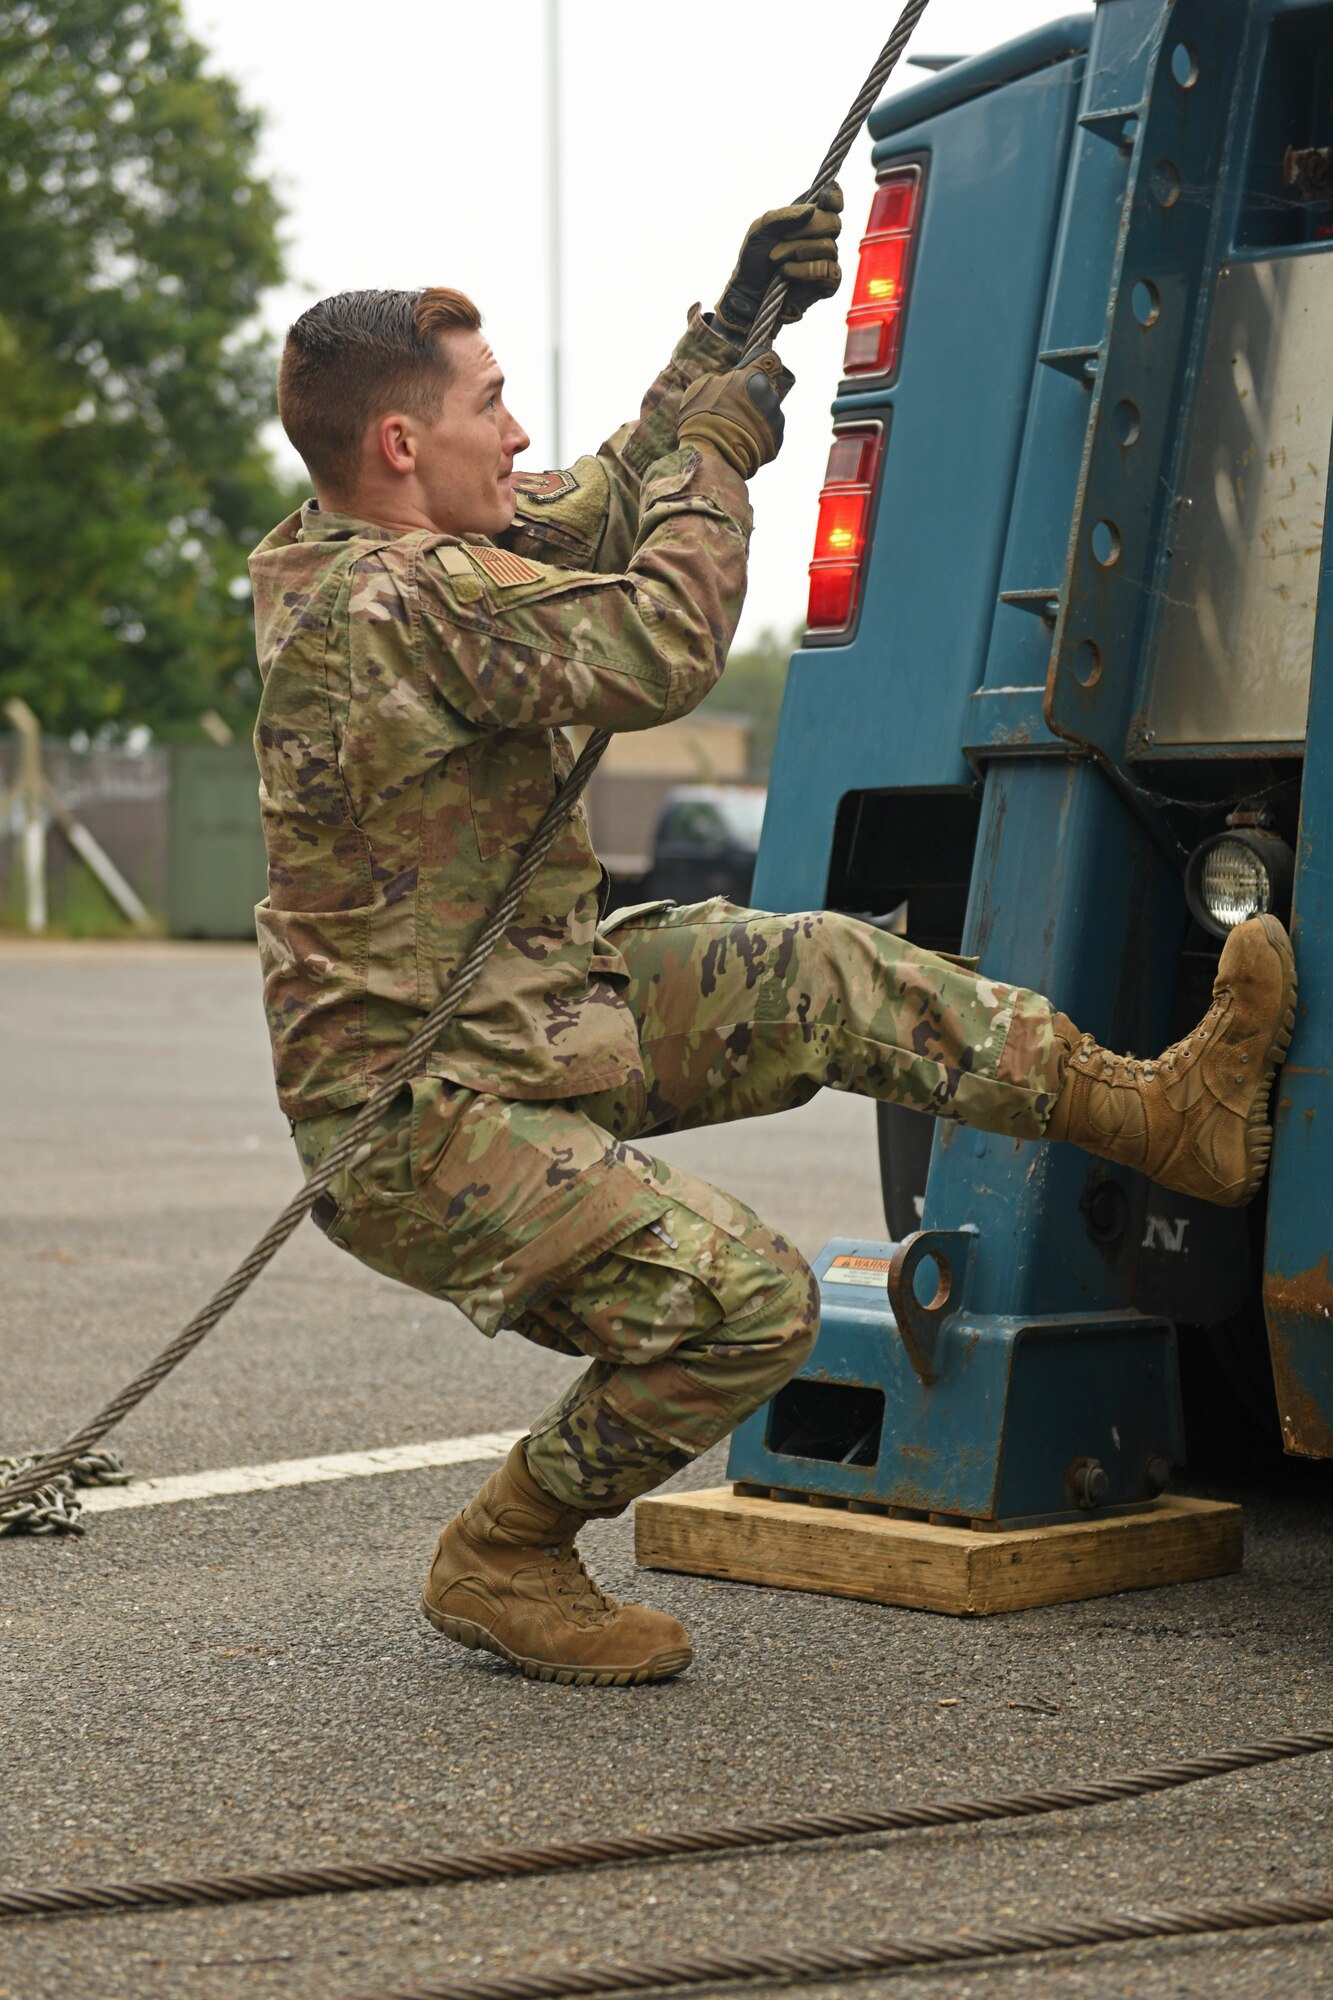 U.S. Air Force Senior Airman Devin Needs, 100th Logistics Readiness Squadron ground transportation operator pulls a cable from a tow truck during a Readiness Honed In Operations training day at RAF Lakenheath, England, July 13, 2019. The training was the first dual-wing RHINO training day for ground transportation Airmen that encompassed expeditionary, contingency and specialty skills training such as basic expeditionary airfield resources base setup, integrated defense and vehicle recovery. (U.S. Air Force photo by Senior Airman Luke Milano)